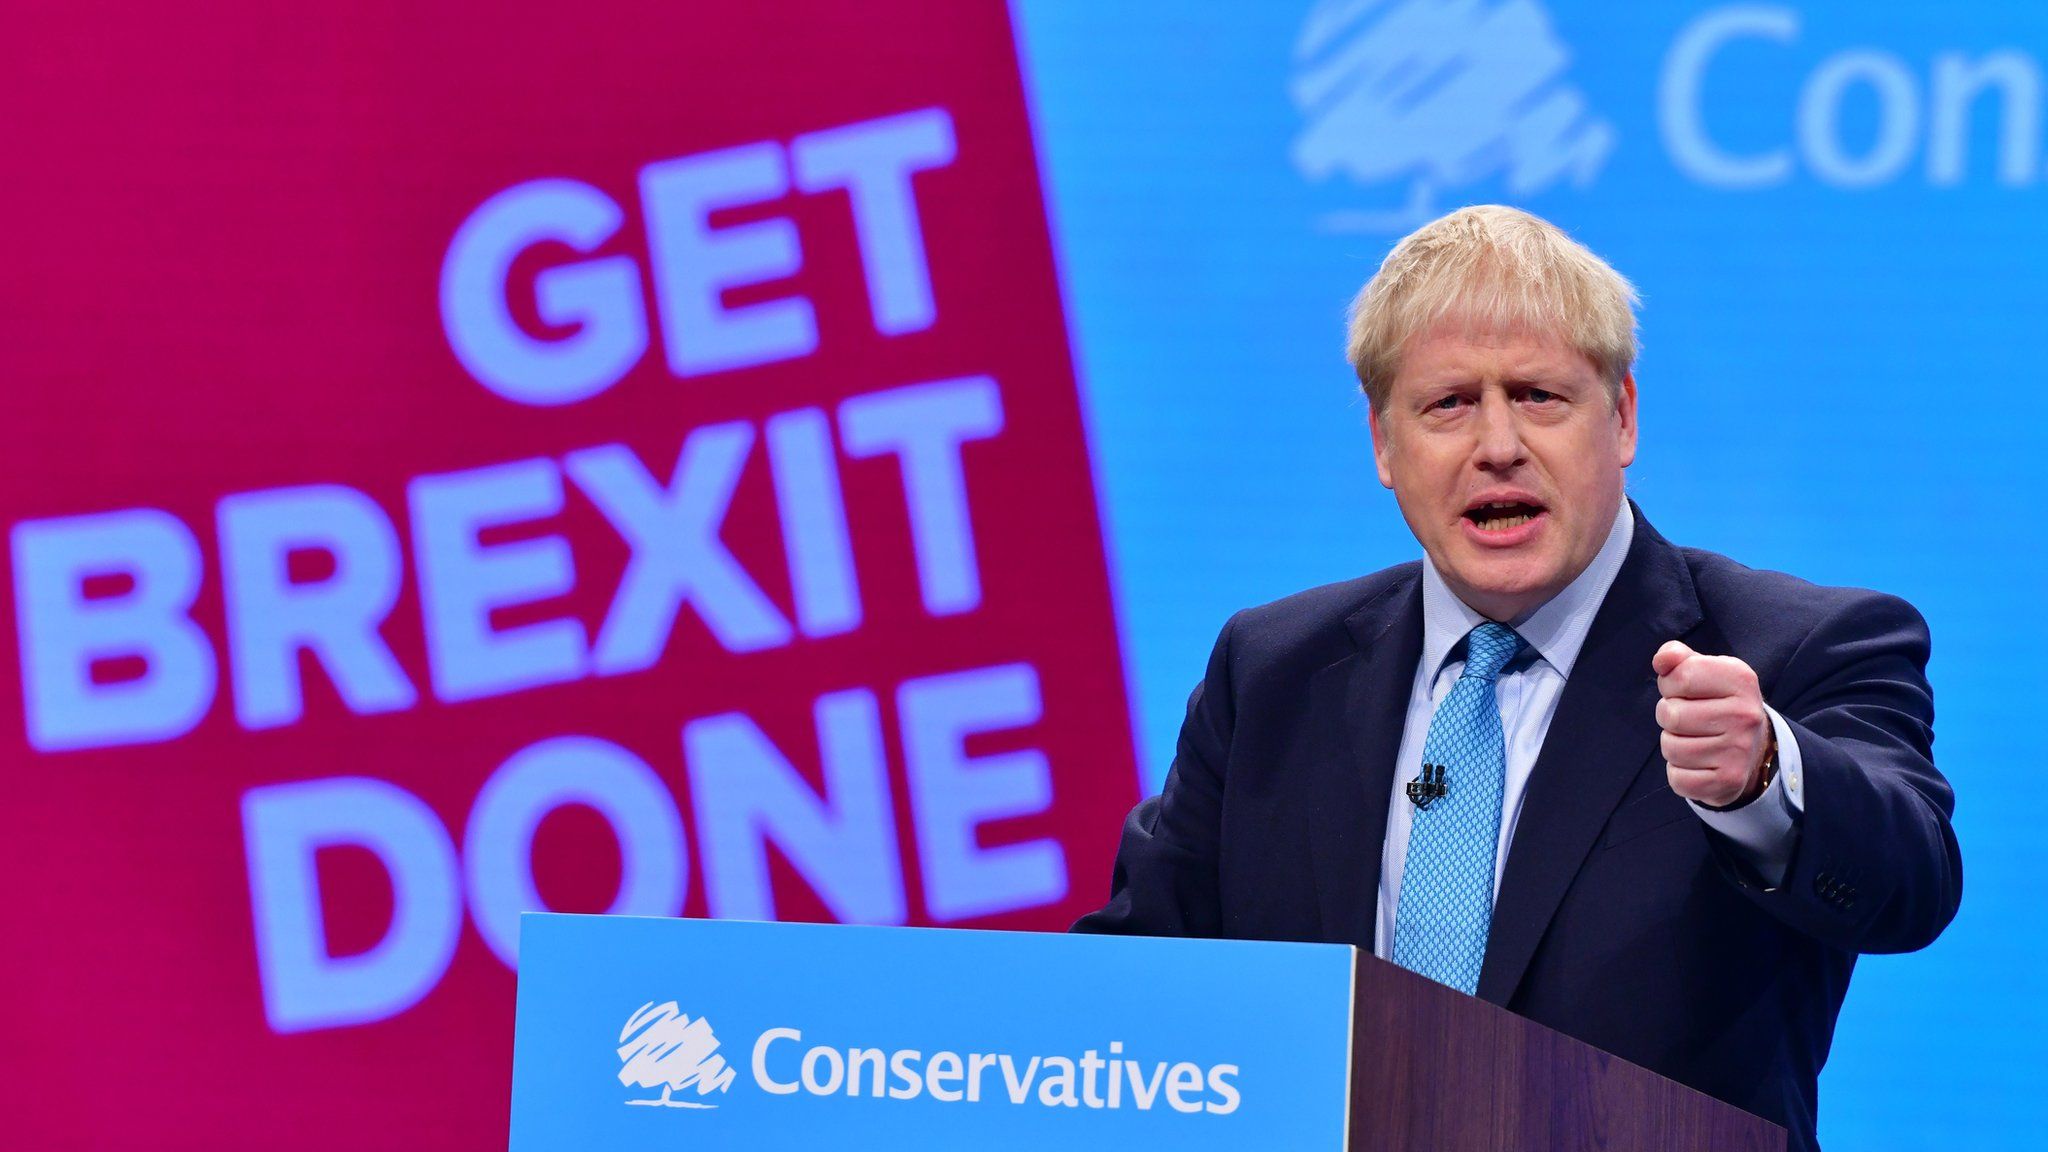 Boris Johnson at Conservative Party Conference in front of "Get Brexit Done" sign